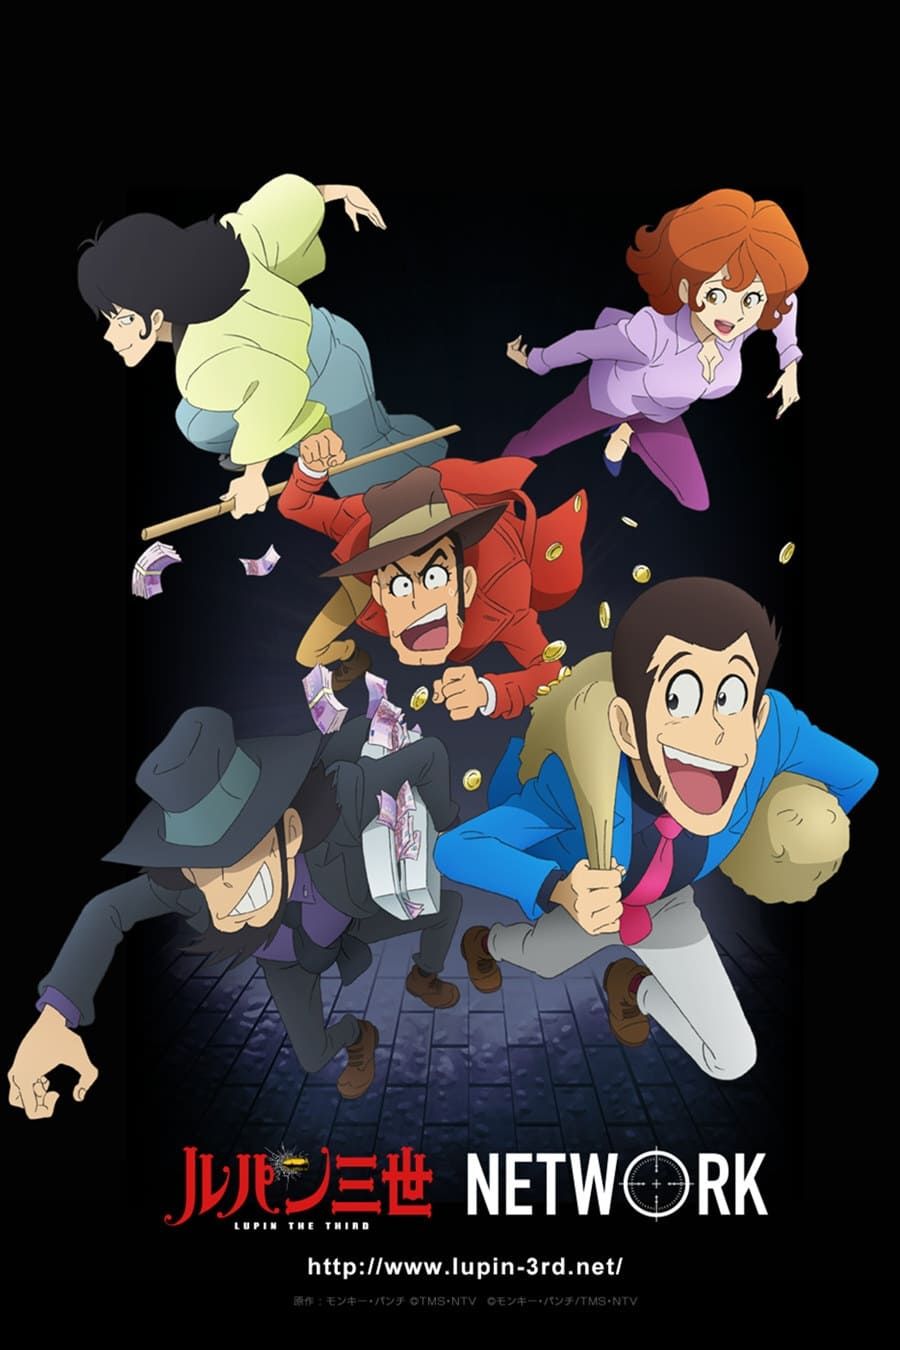 Lupin III: Prison of the Past (2019) - Watch Full Movie Online - Plex